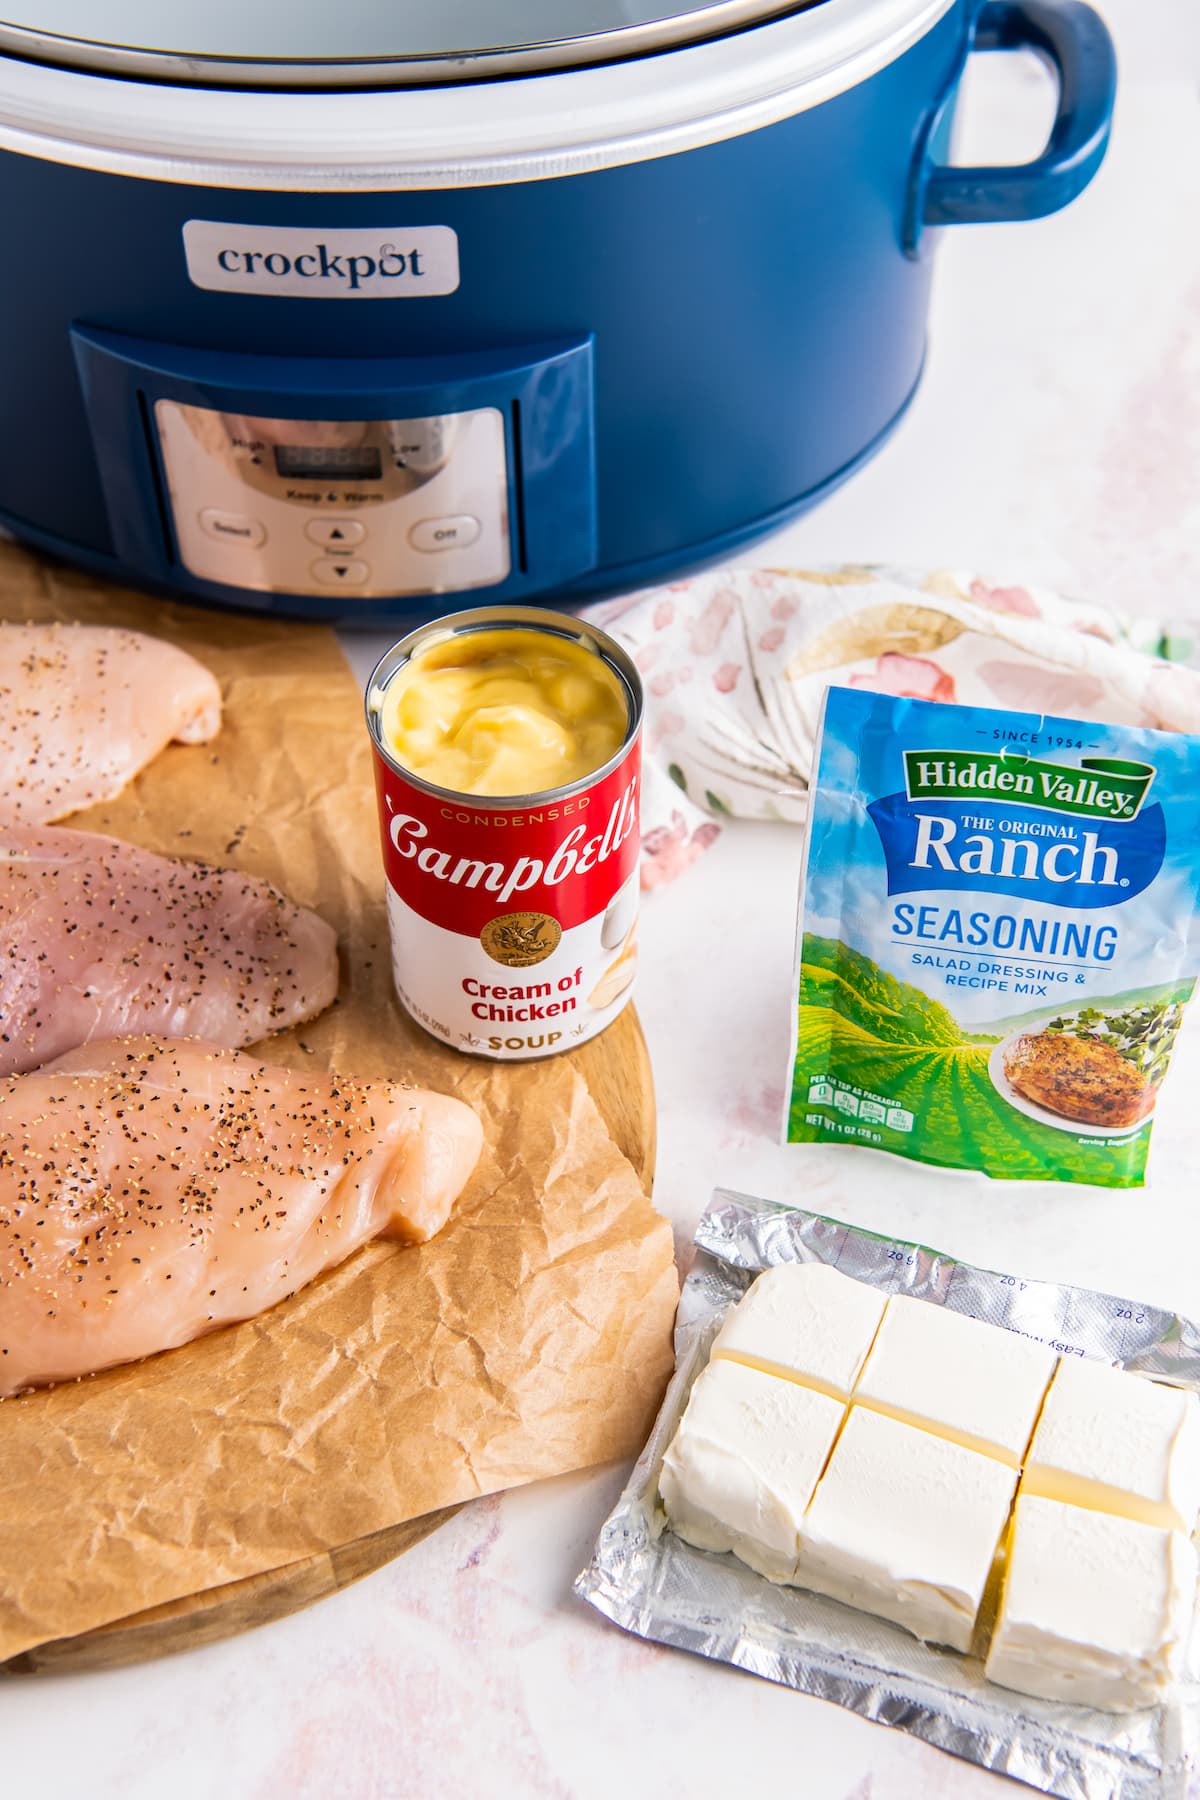 a crockpot, can of soup, chicken breasts, and ranch seasoning packet